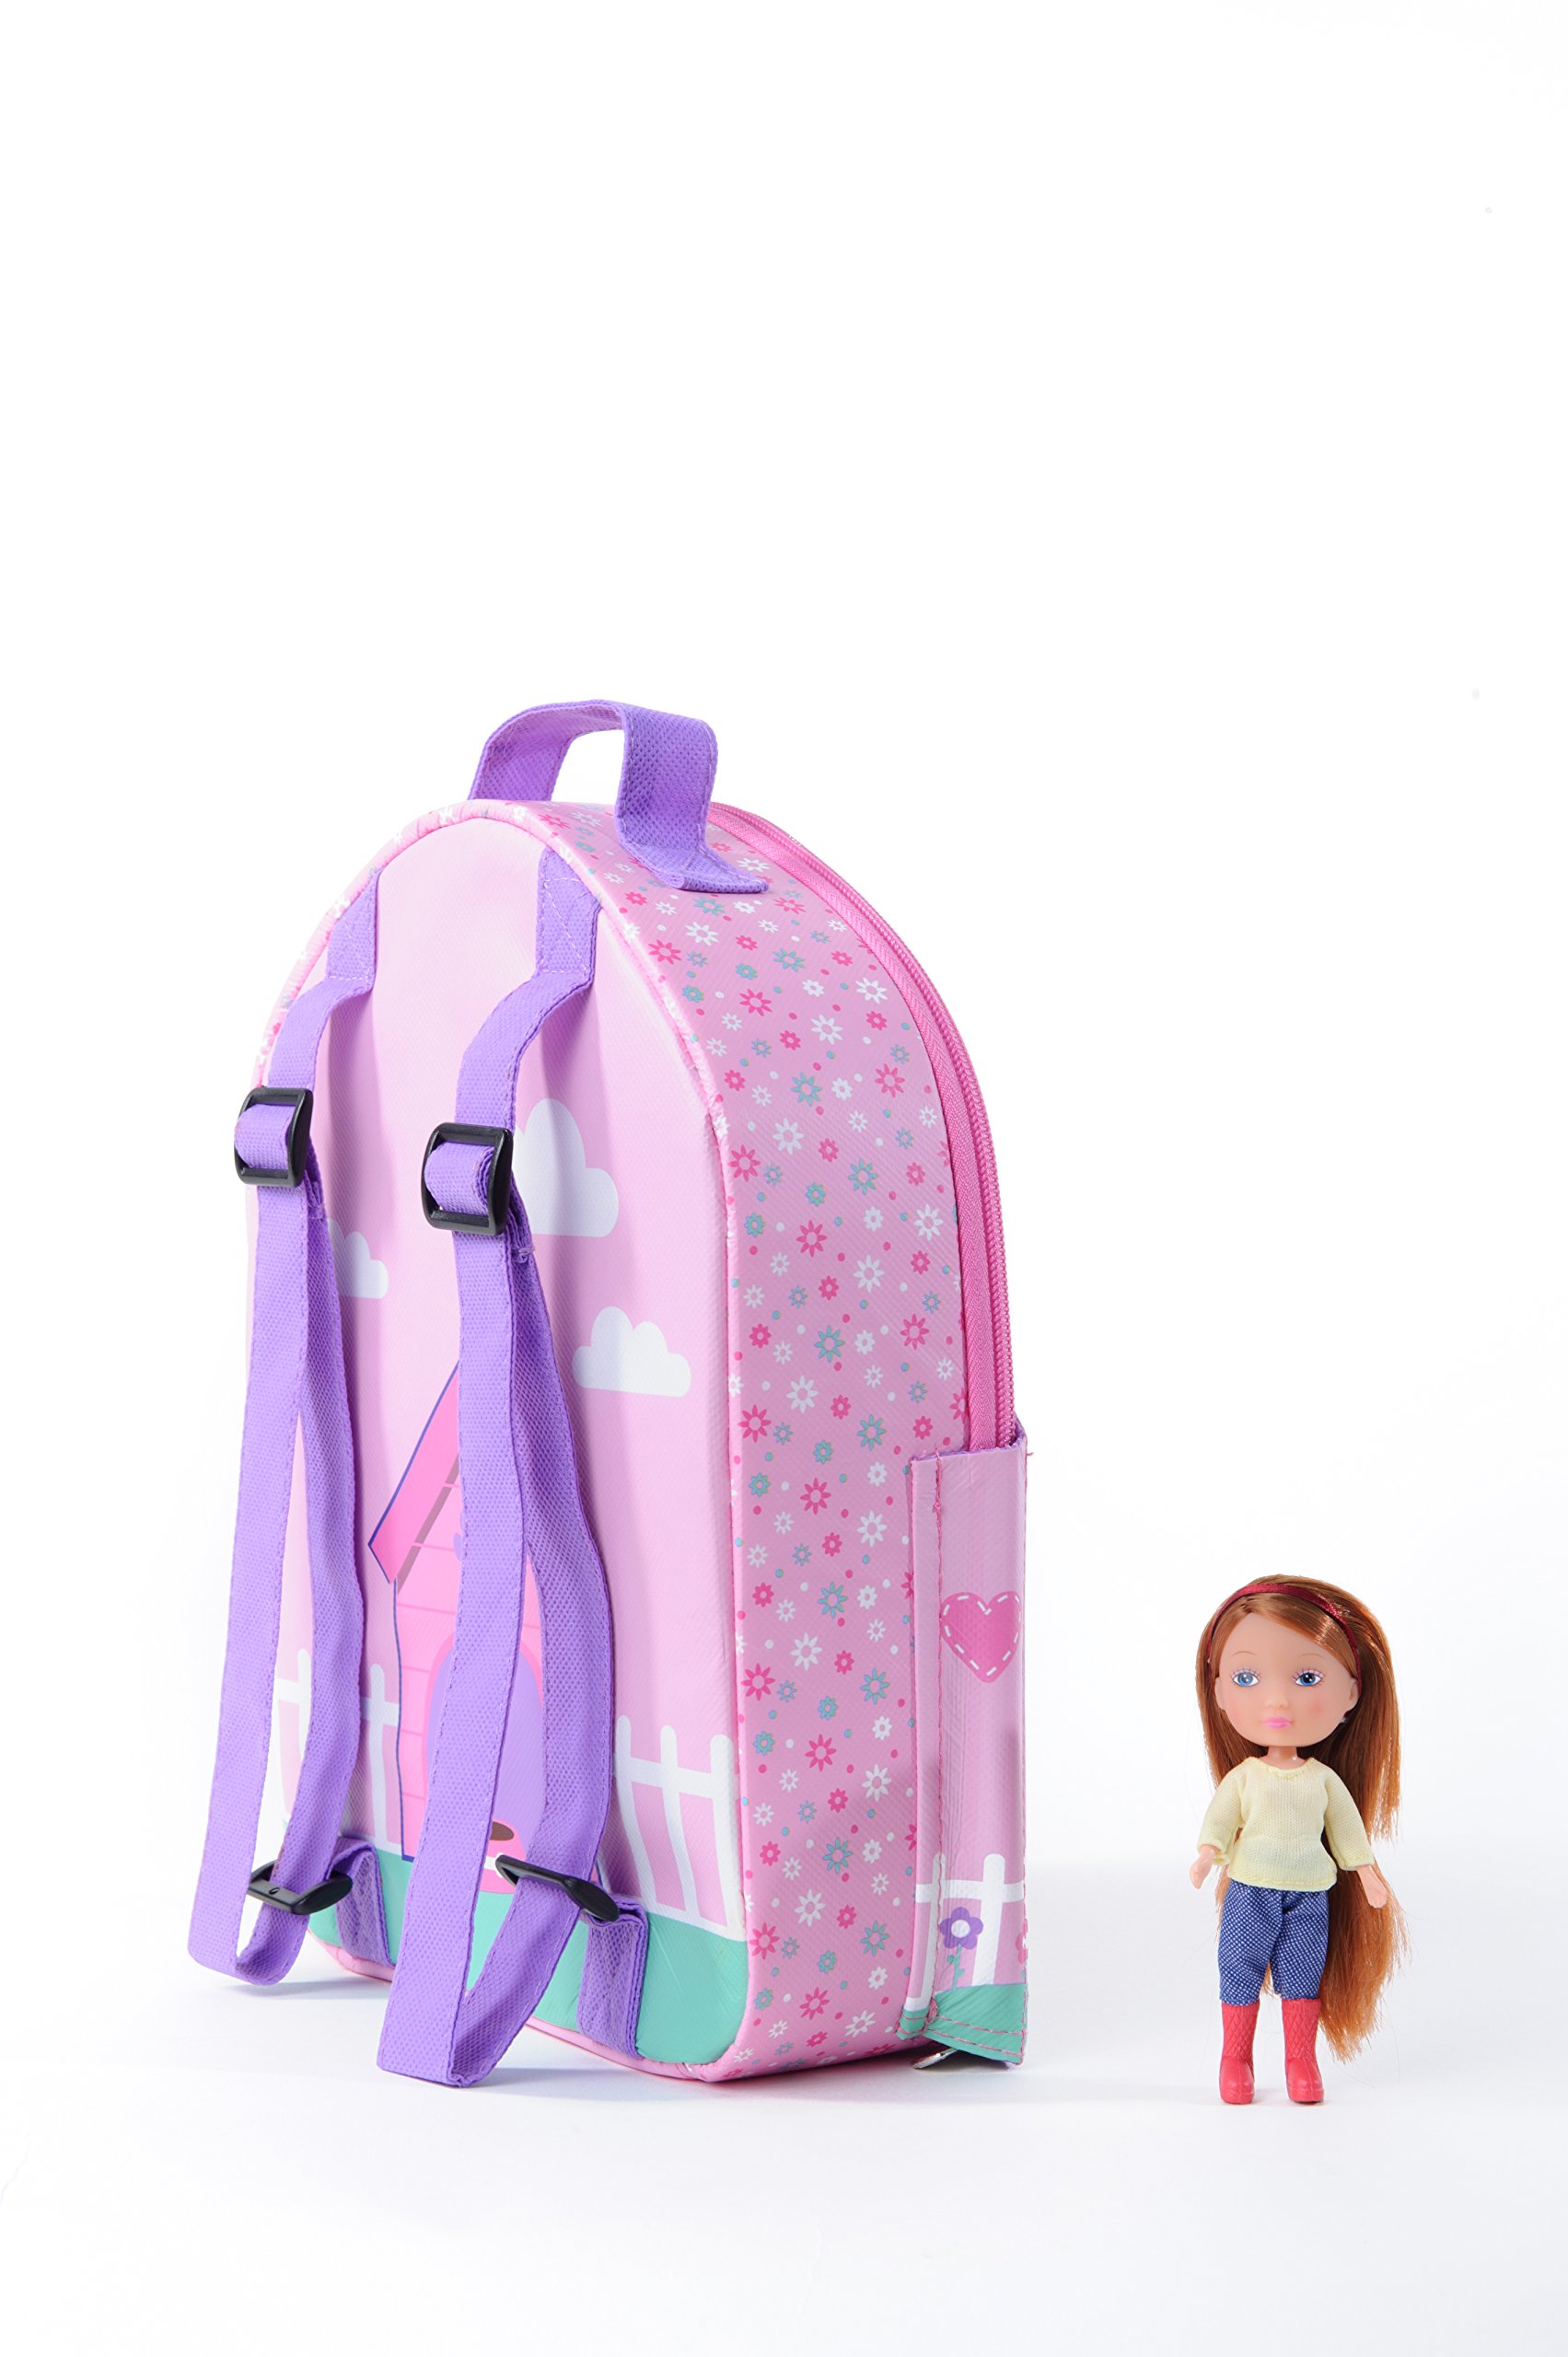 Neat-Oh!: Everyday Princess Dollhouse Backpack, Versatile Backpack Zips Open to Reveal a Vibrantly-Decorated, Two-Story Castle Theme Dollhouse, Inspires Imaginations, For Ages 3 and up